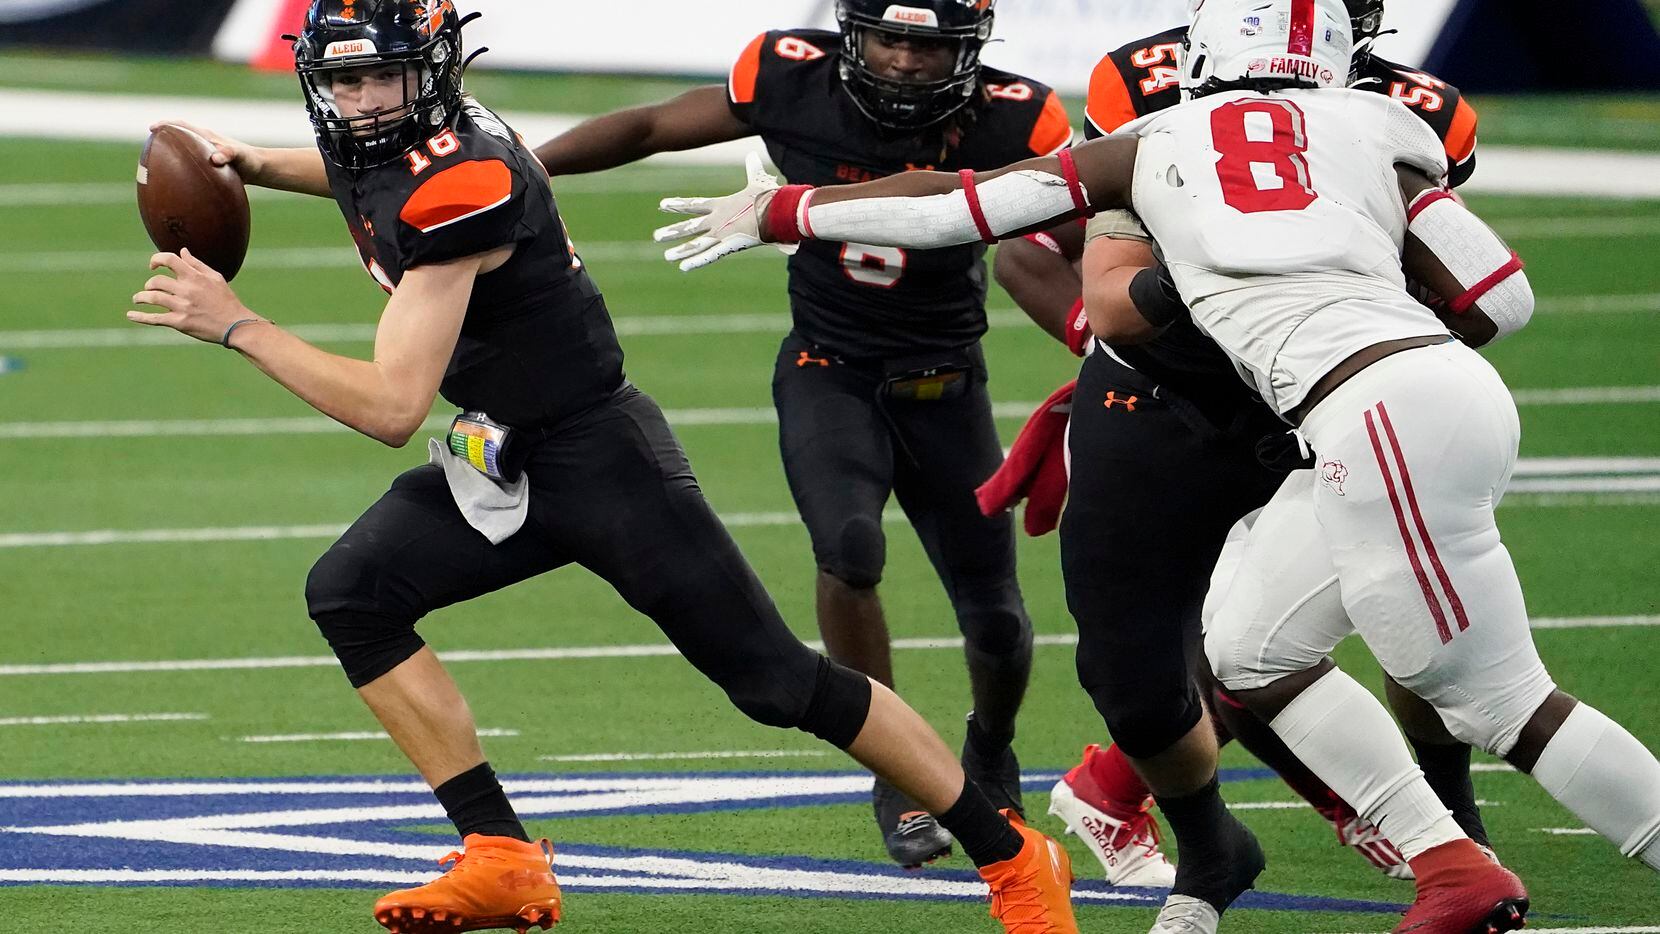 Aledo quarterback Brayden Fowler-Nicolosi (16) gets past Crosby defensive lineman Jeremiah Isaac (8) during the first half of the Class 5A Division II state football championship game at AT&T Stadium on Friday, Jan. 15, 2021, in Arlington. (Smiley N. Pool/The Dallas Morning News)